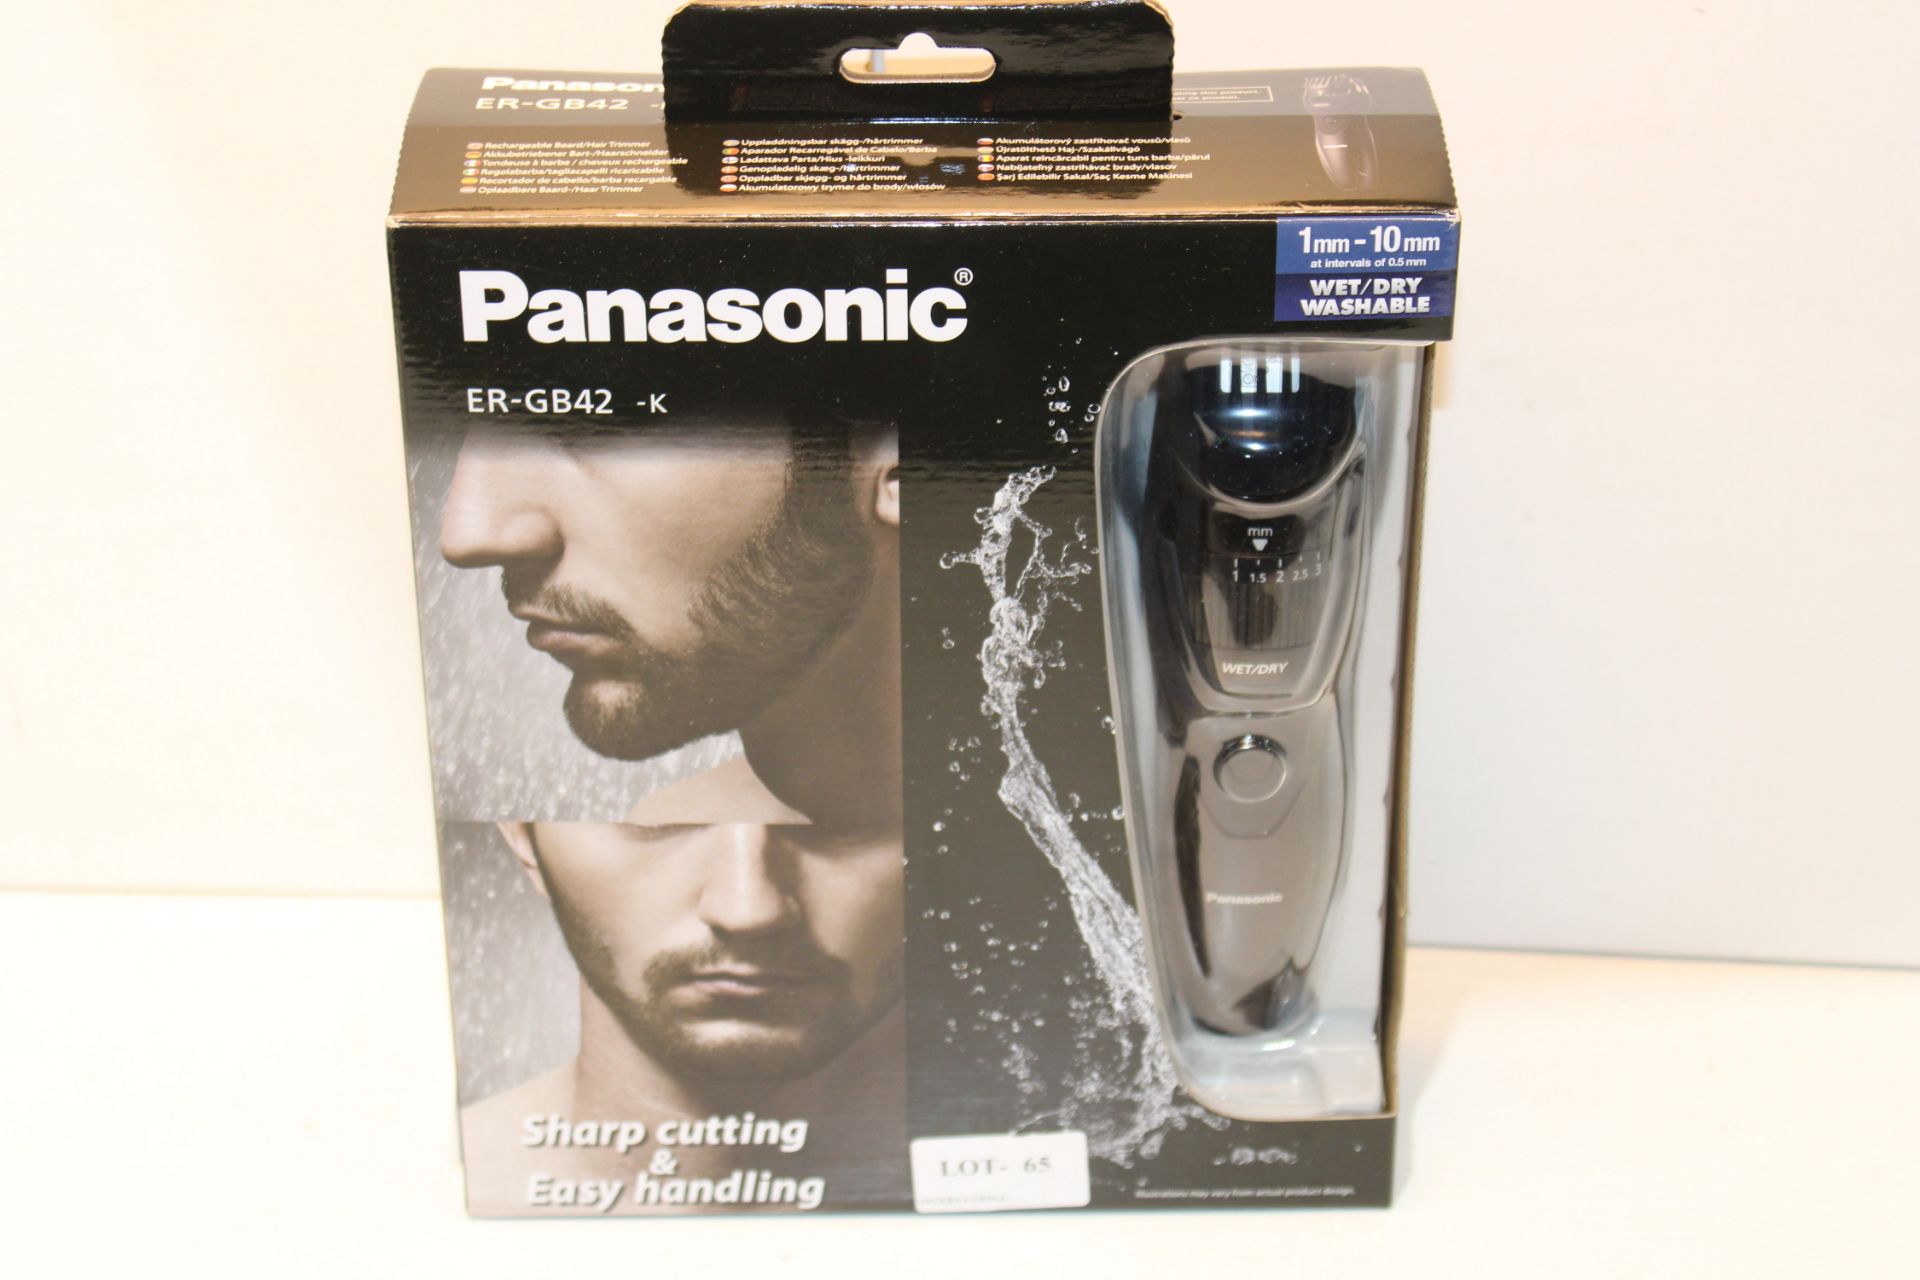 BOXED PANASONIC WET/DRY WASHABLE SHAVER MODEL: ER-GB42-K RRP £42.99Condition ReportAppraisal